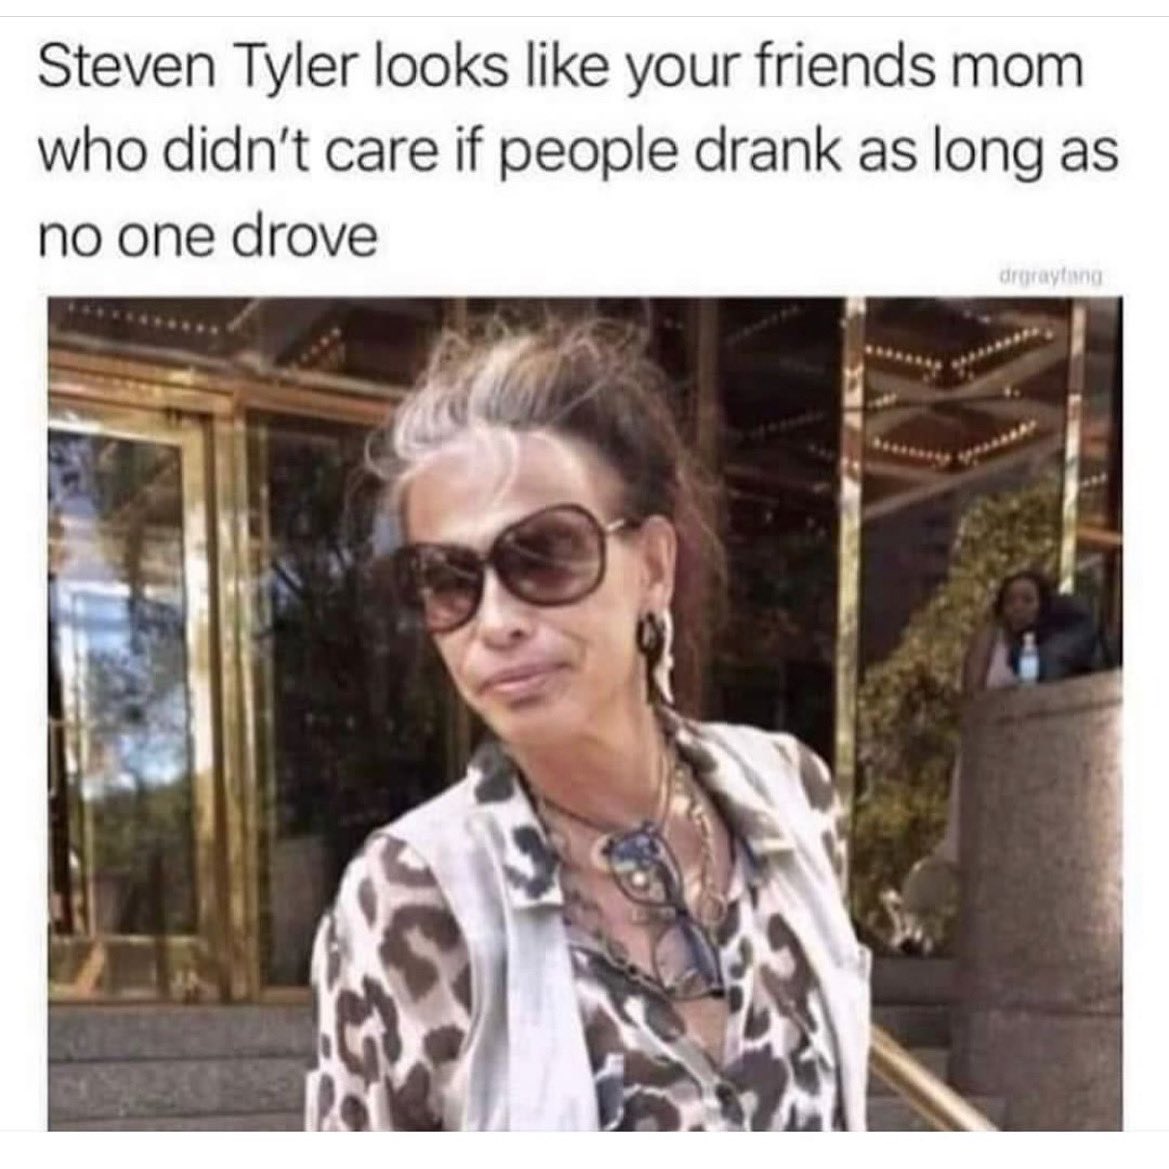 Dude looks like…I mean, the jokes write themselves. 🎶 👵🏼 🍹 Mean but accurate. @strange_allies
.
#strangeallies #musicmemes #musicmemesdaily #musicmeme #musicianmemes #musicshitpost #rockmemes